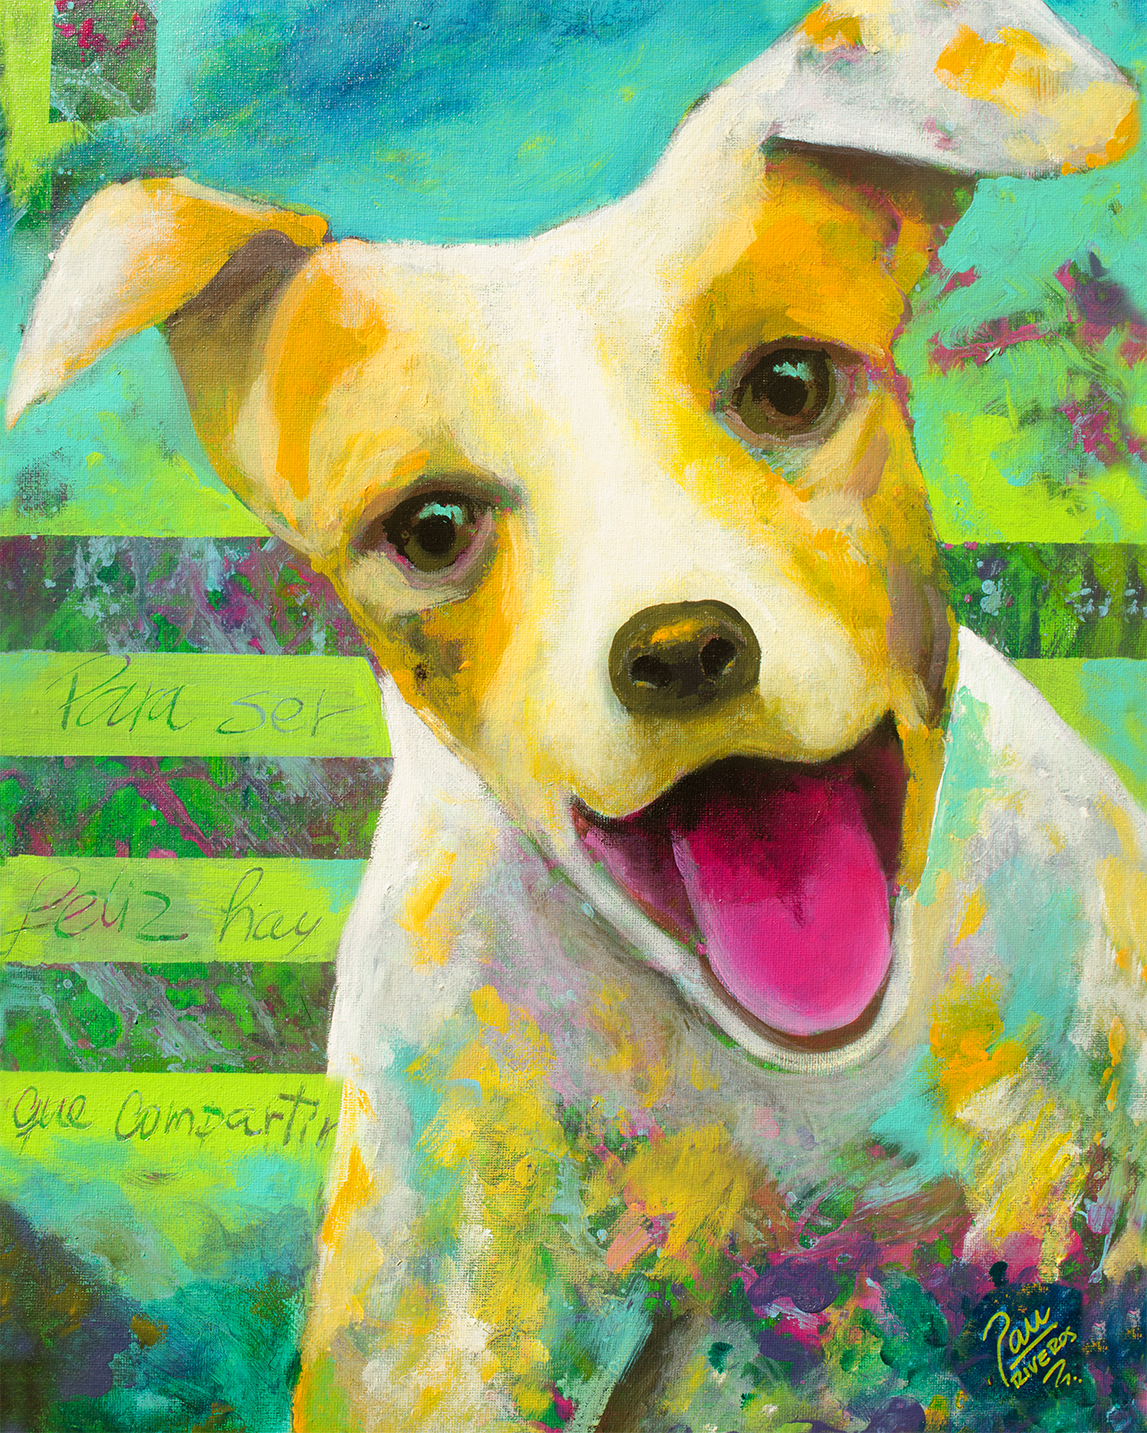 Zaguate, a wise and happy dog - Costa Rica Art 16 x 20"